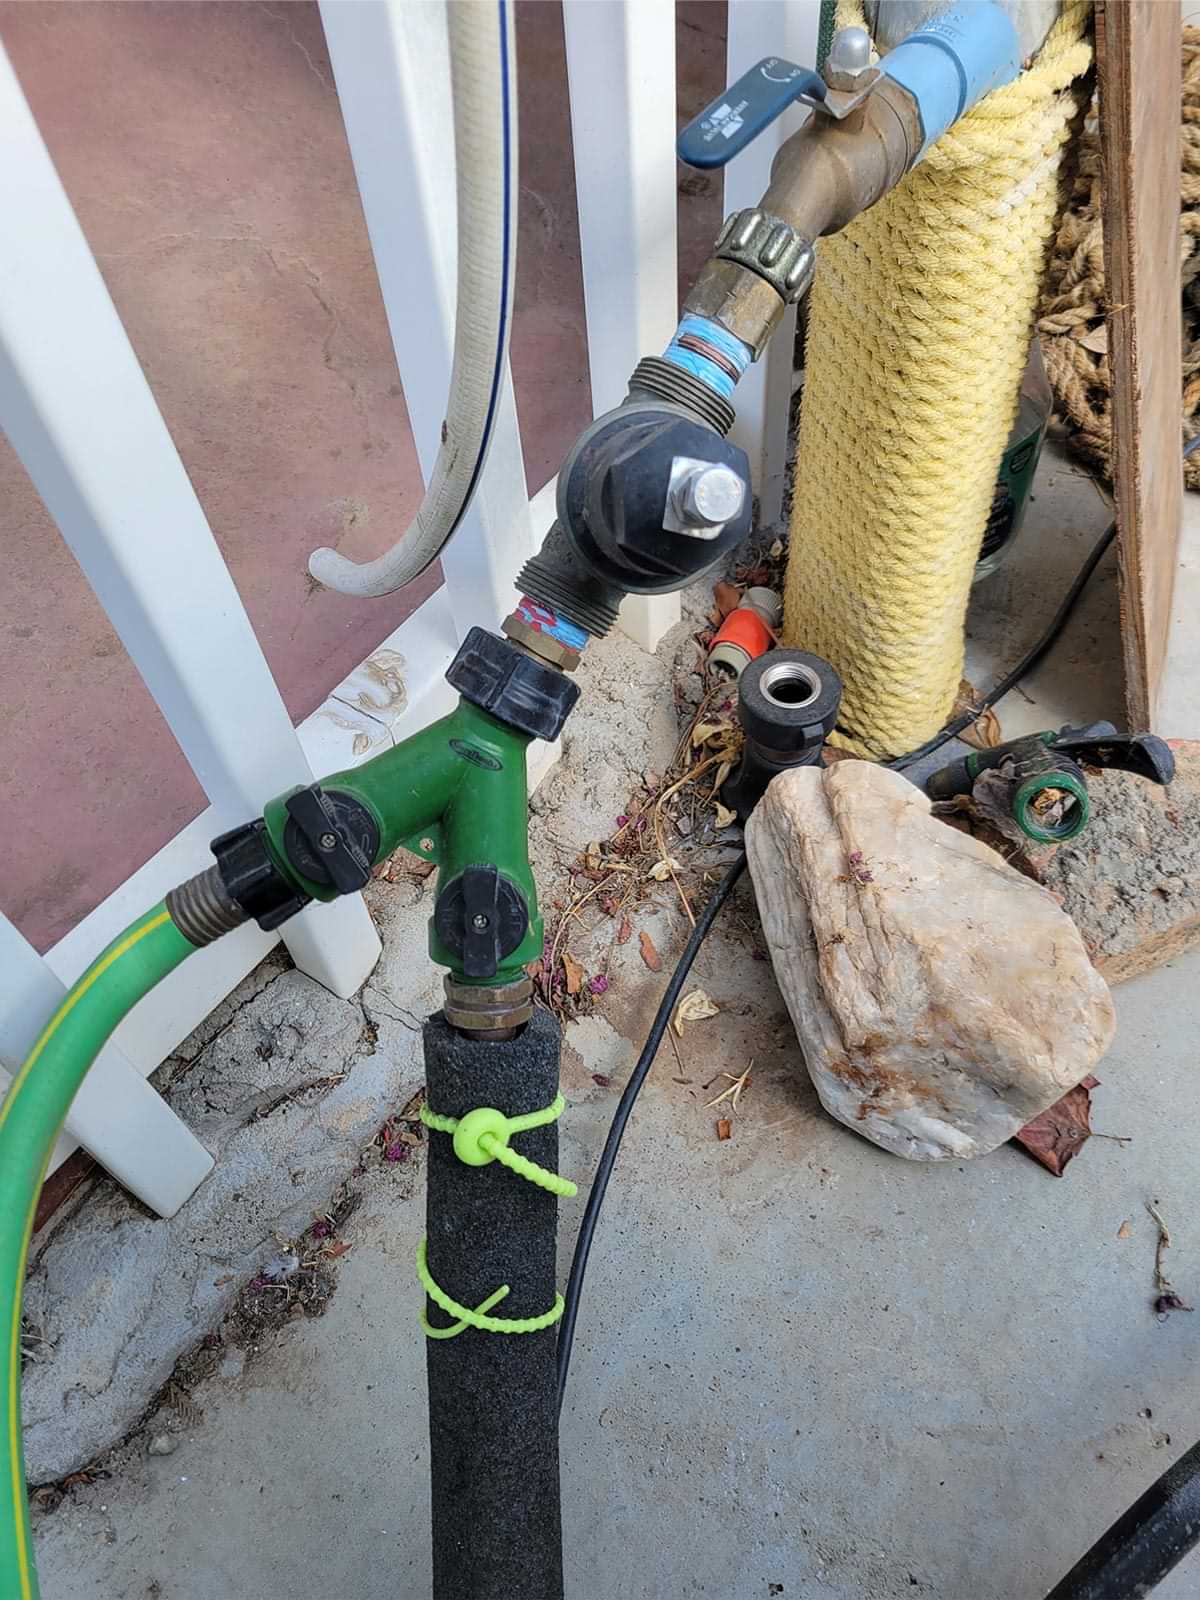 two neon green silicone zip ties secure insulation around a water hose